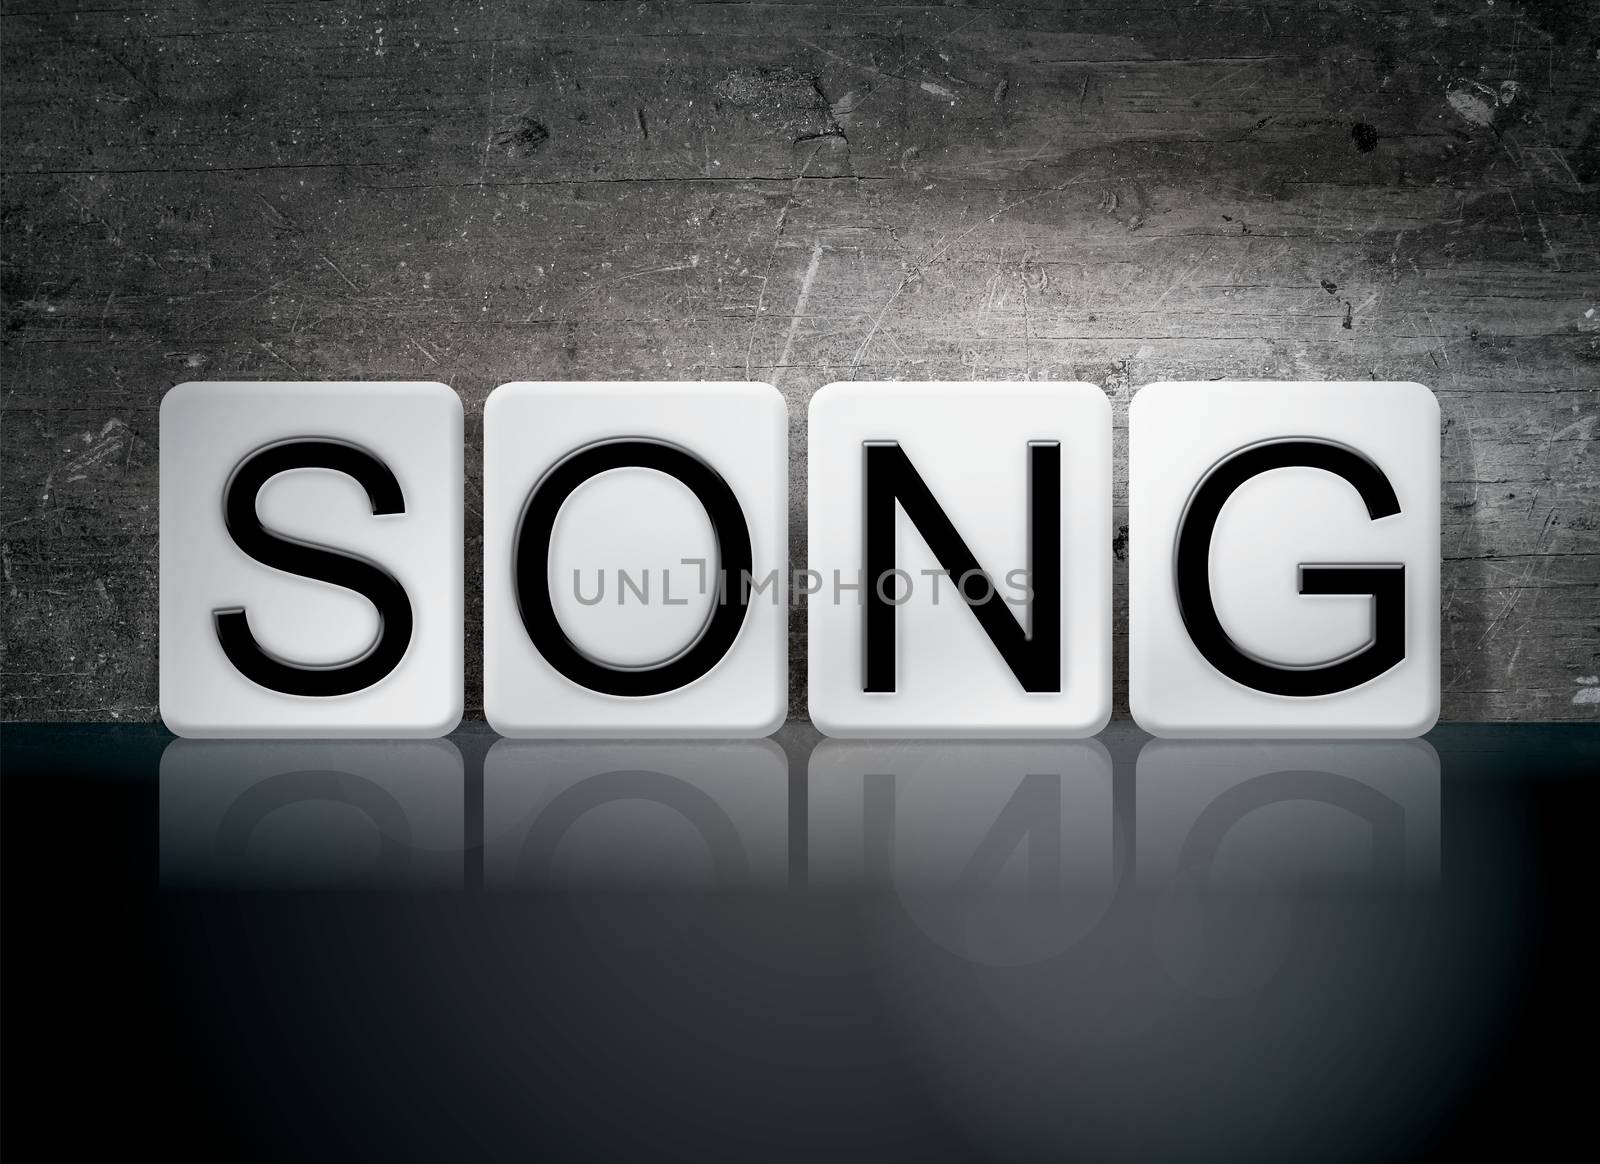 The word "Song" written in white tiles against a dark vintage grunge background.